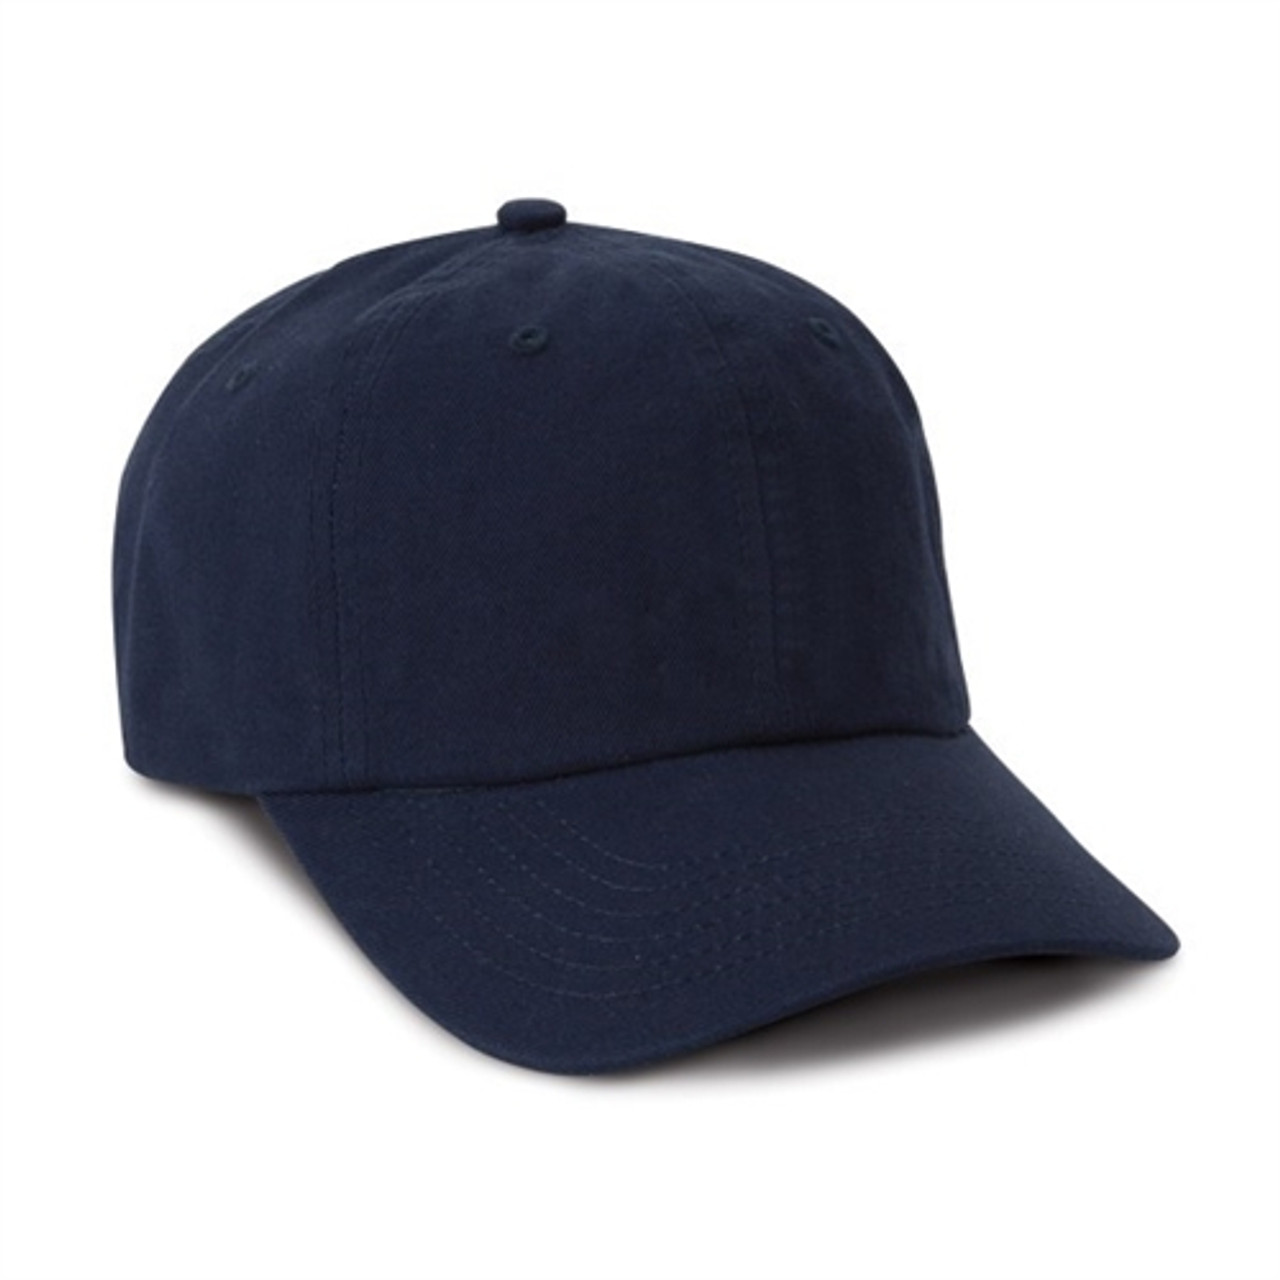 Custom The Original Imperial Unstructured Cotton Twill Hat